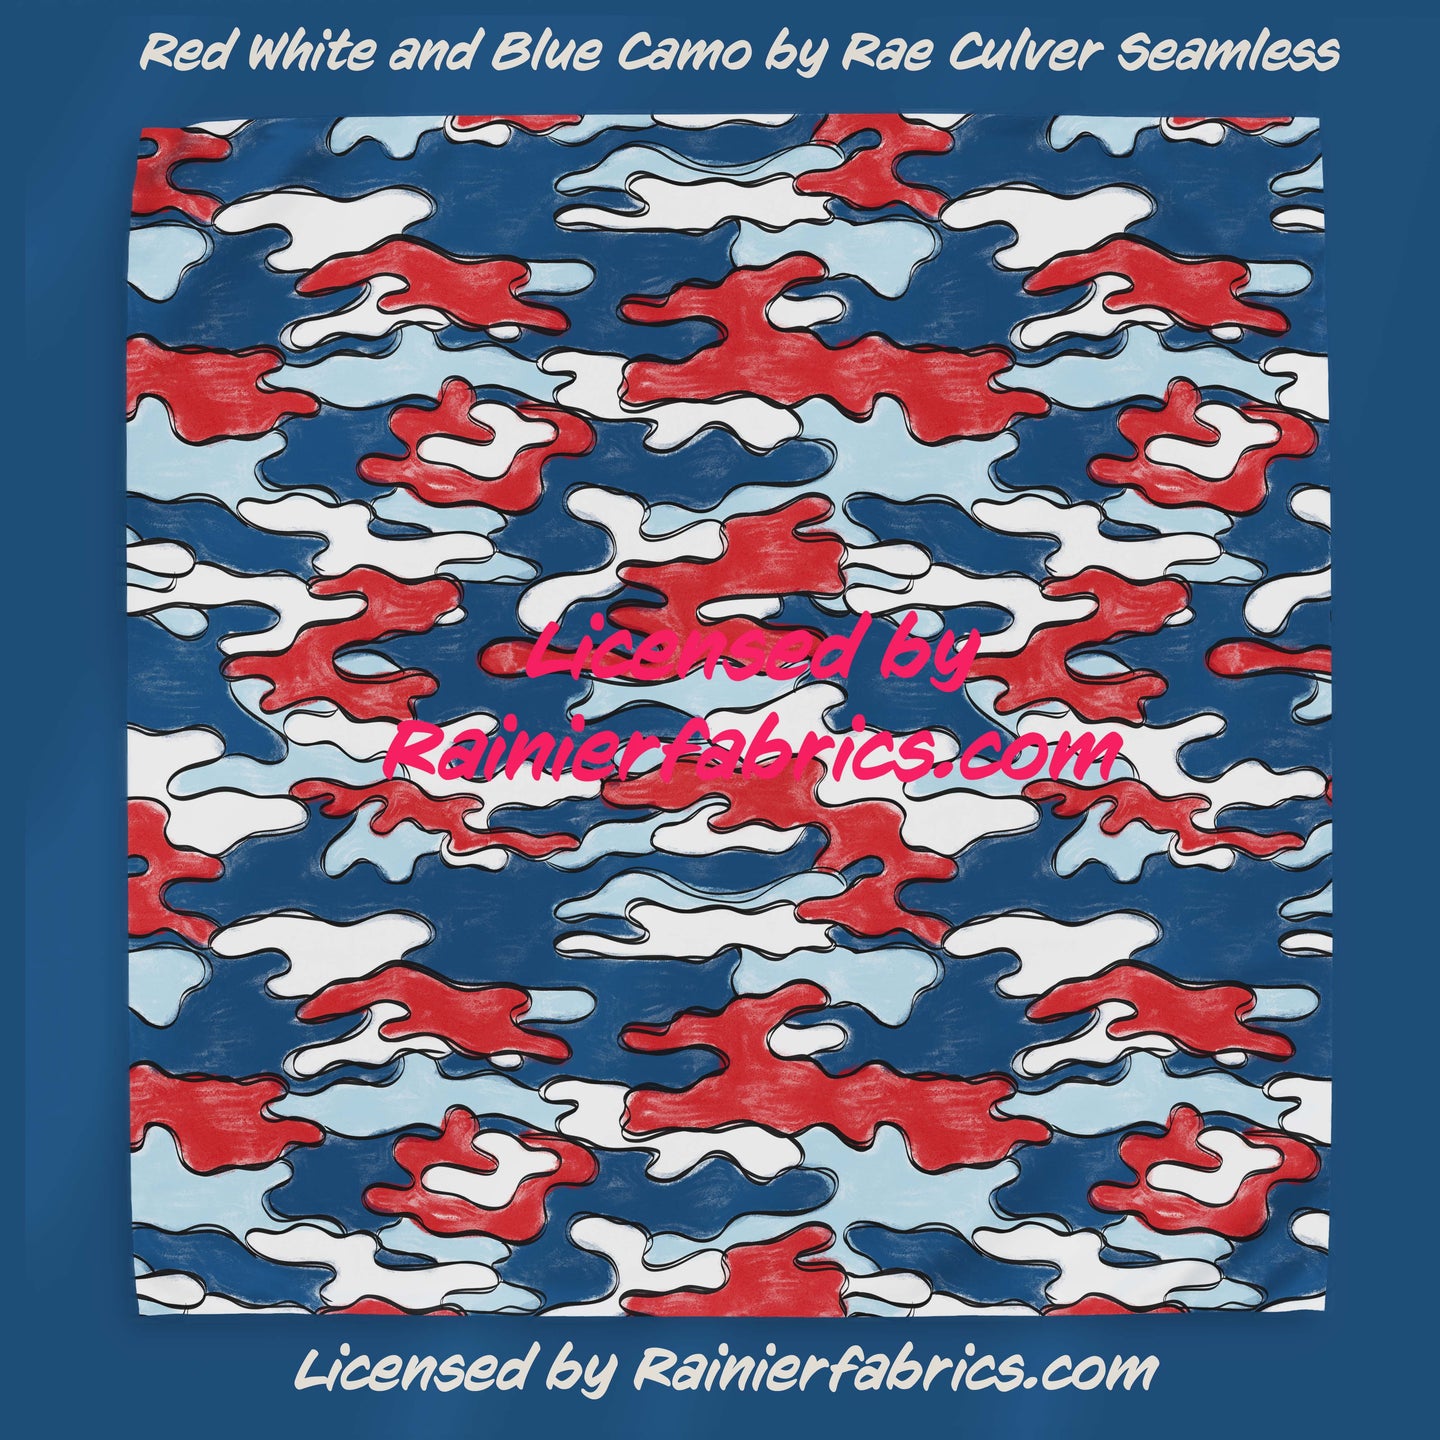 Red White and Blue Camo by Rae Culver Seamless - 2-5 business days to ship - Order by 1/2 yard